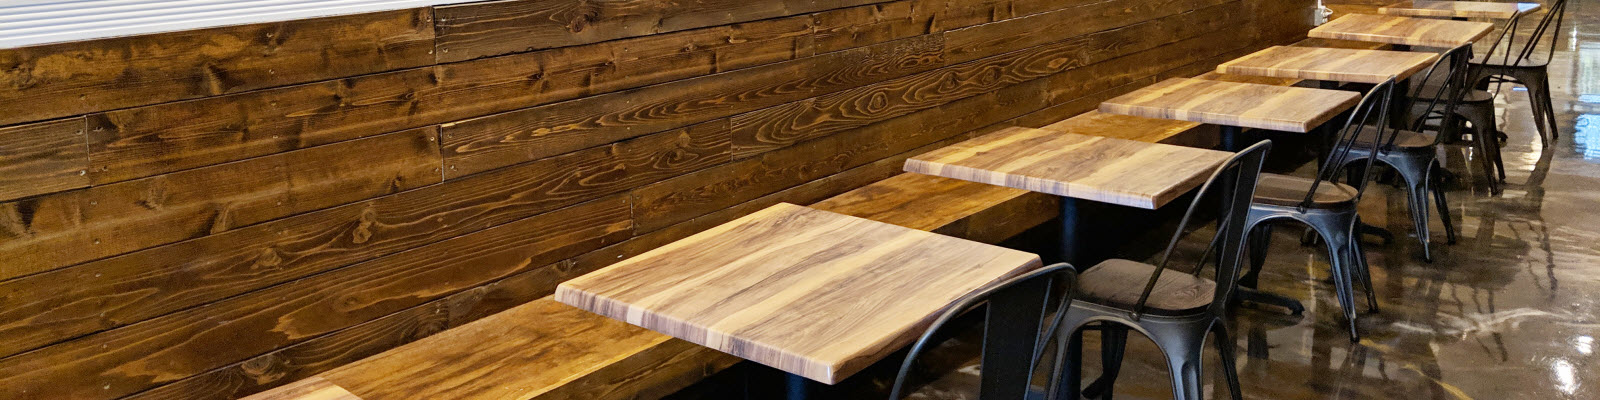 Best Wood Types For Your Restaurant, How To Make A Wood Table Top Smooth